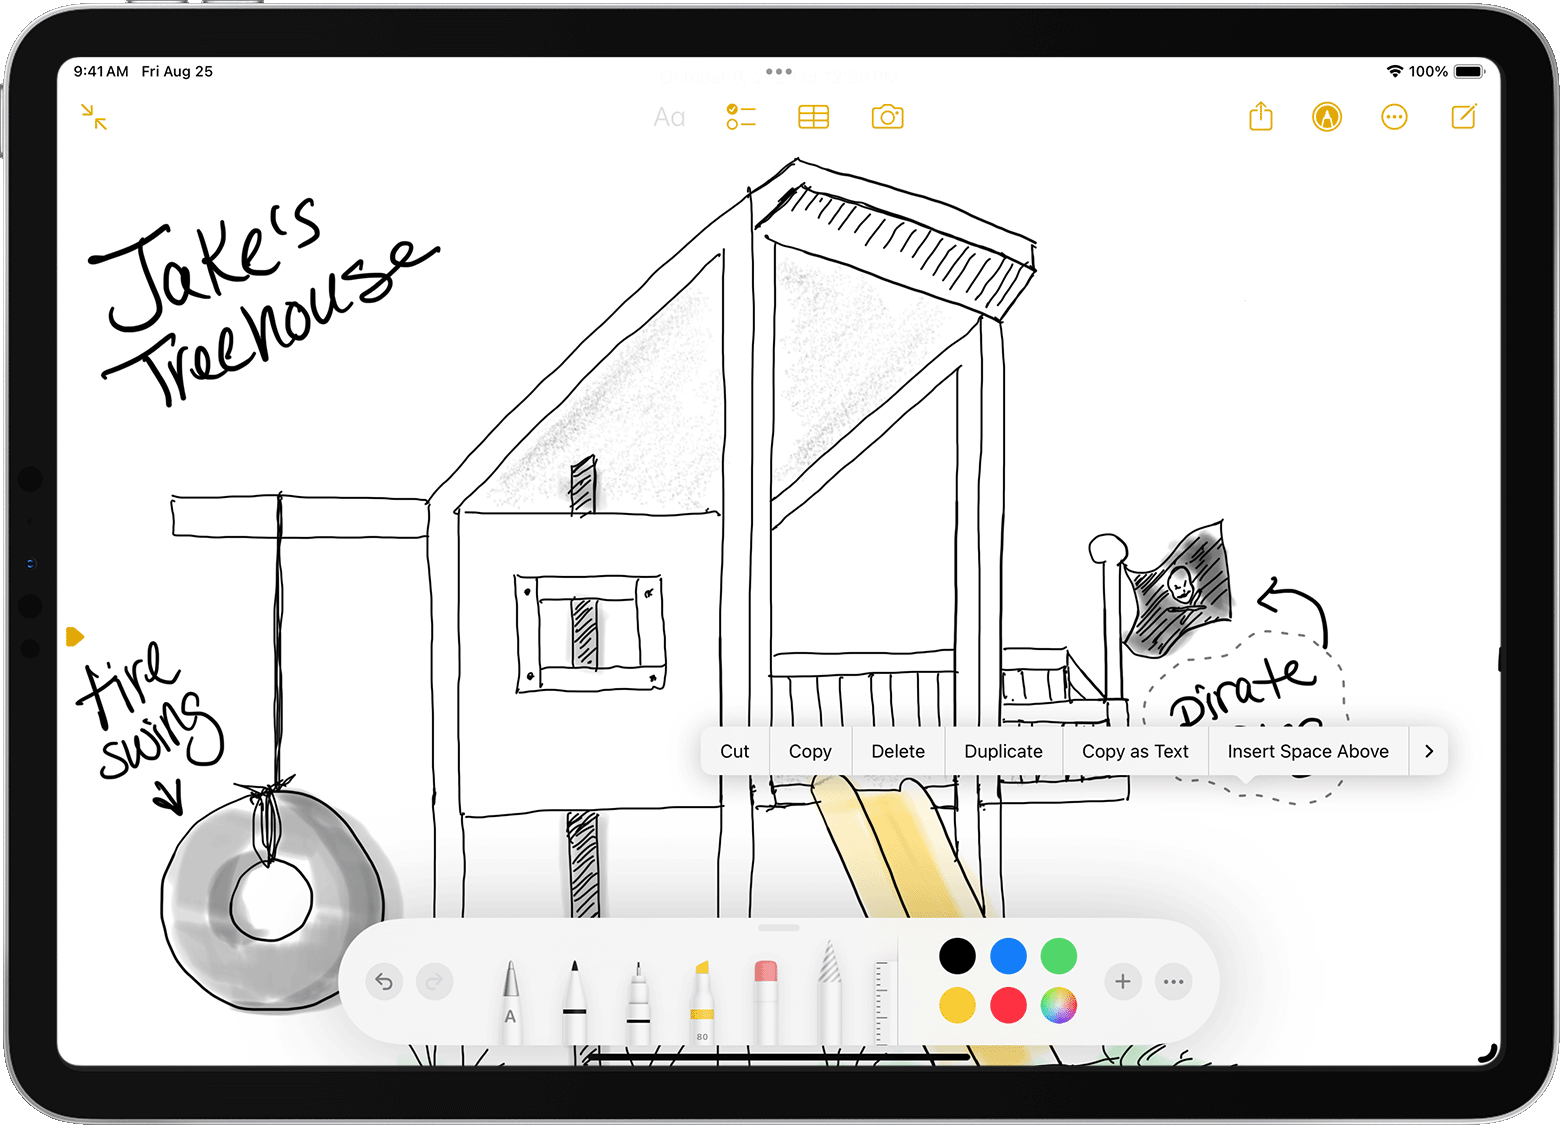 iPad Apple Pencil: Compatibility, Features, How to Use It